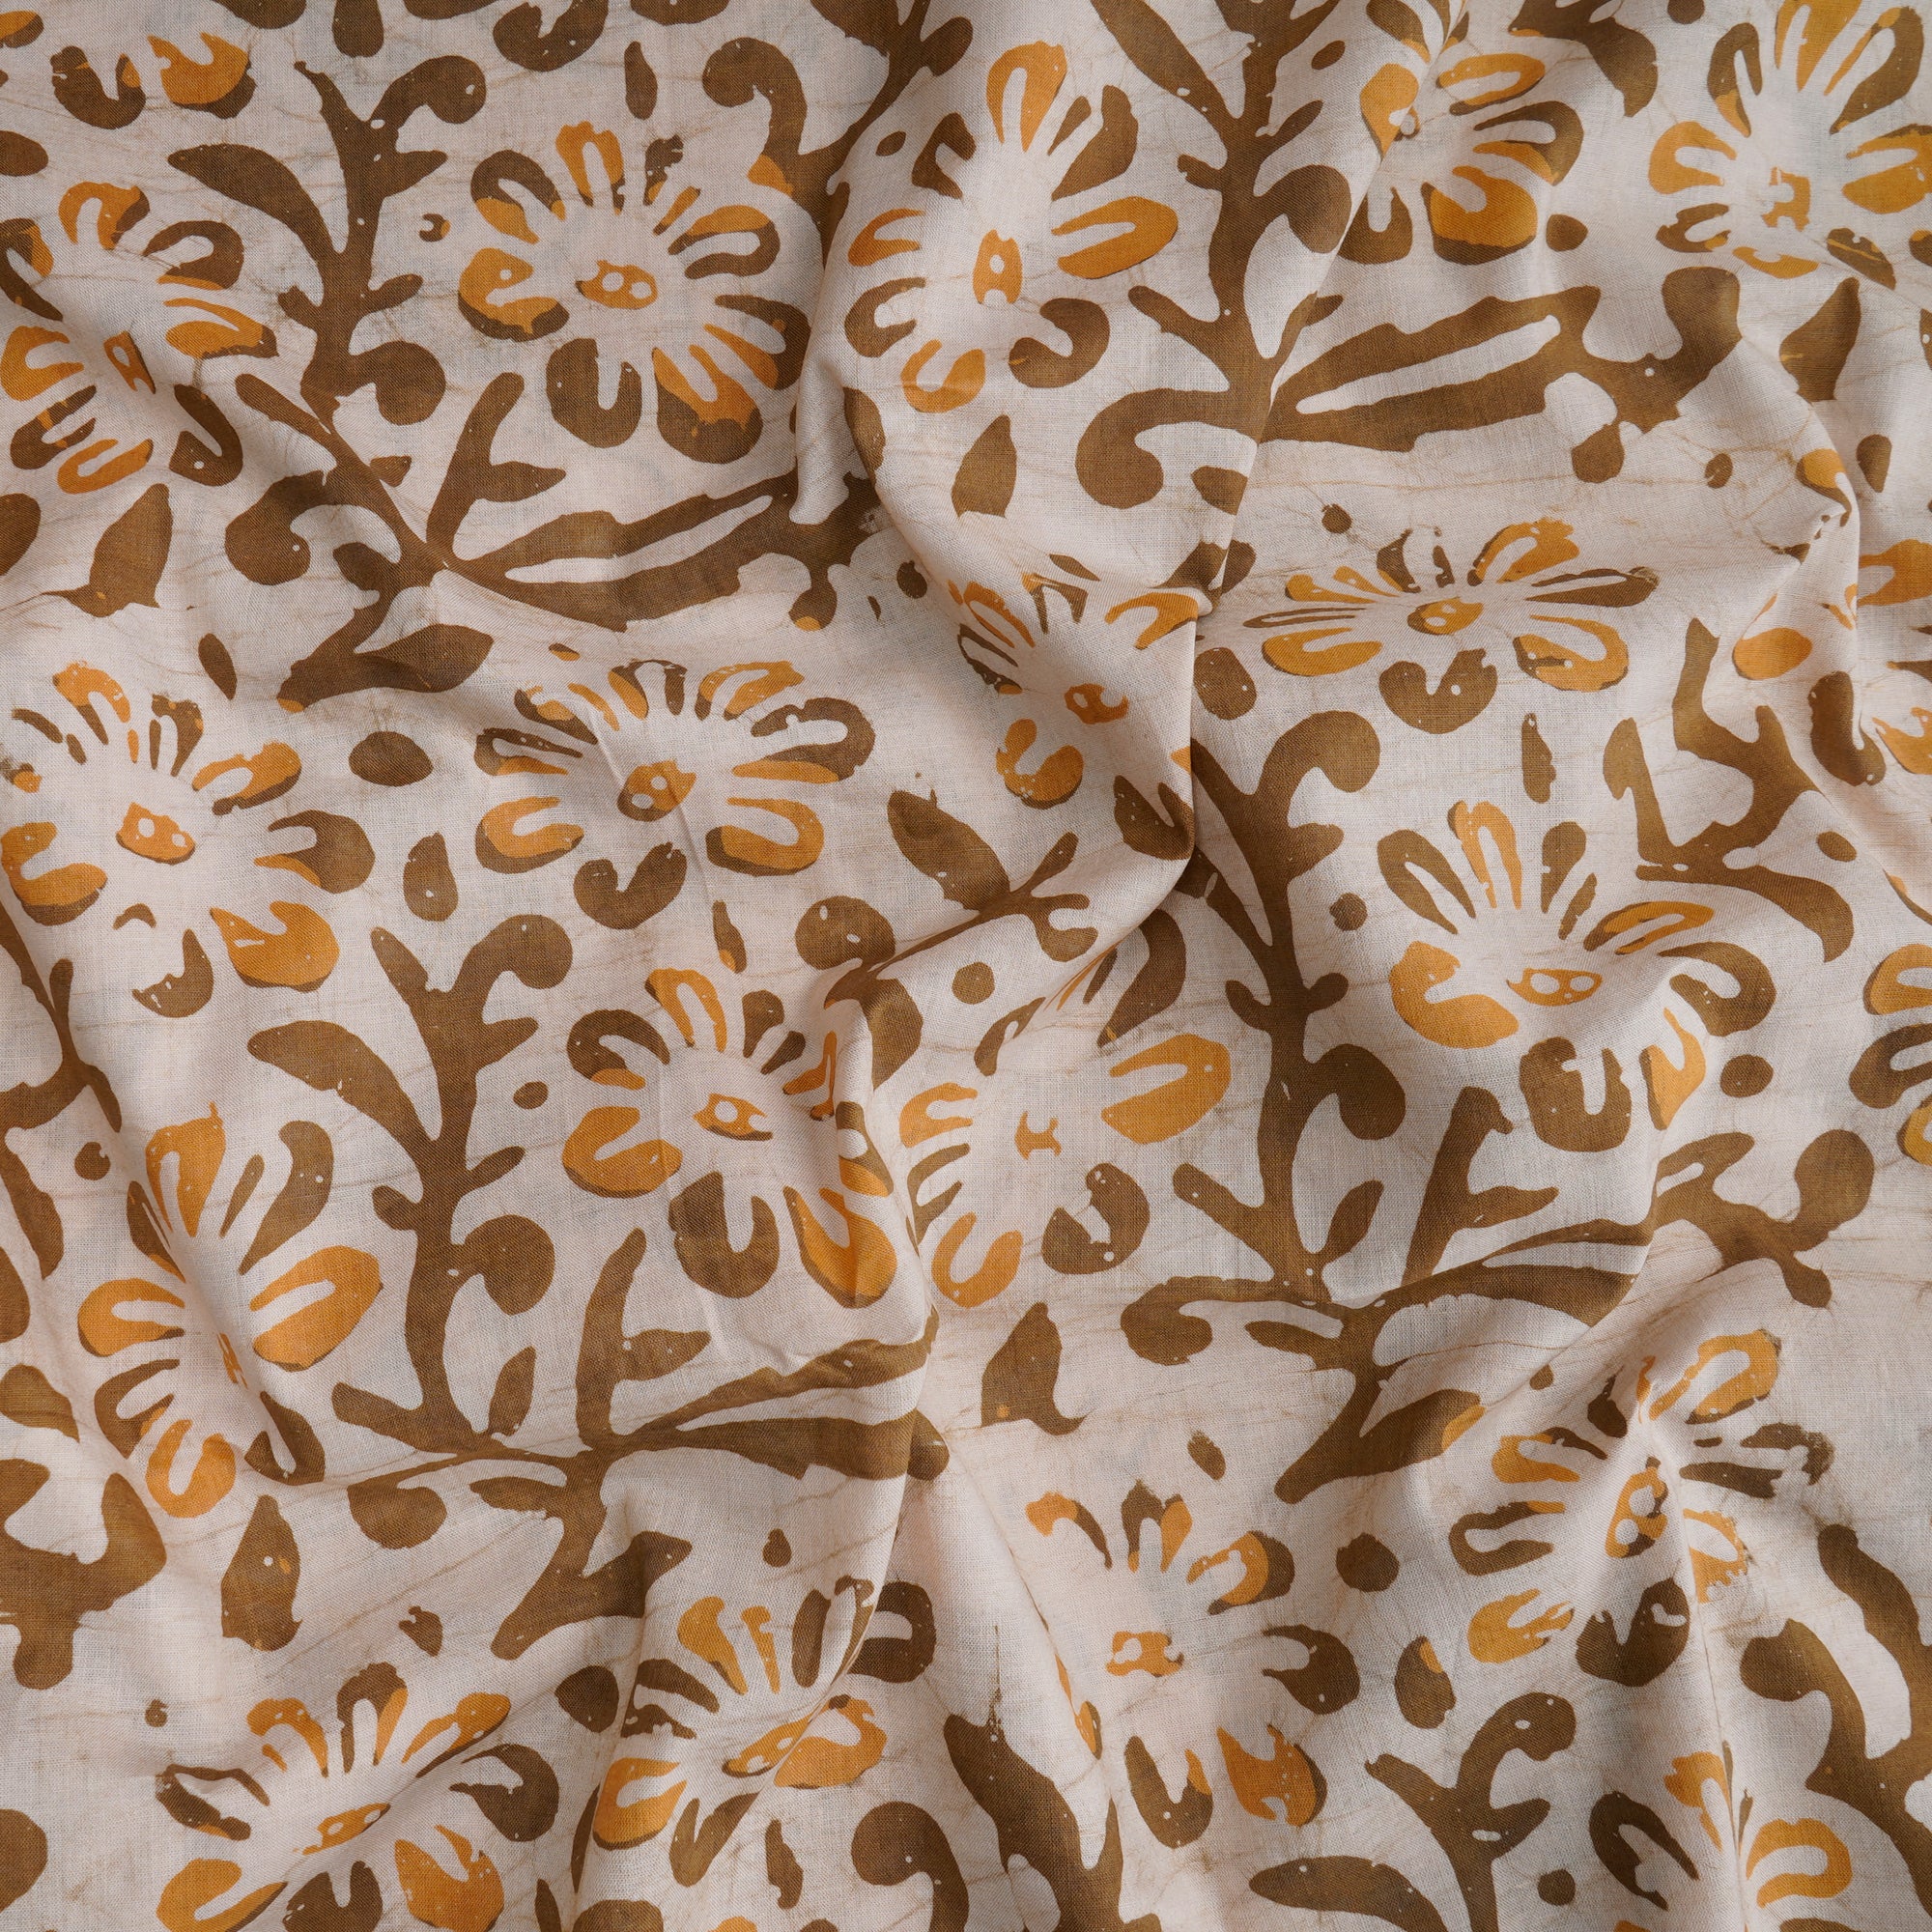 Pearled Lvory Handcrafted Waxed Batik Printed Cotton Fabric